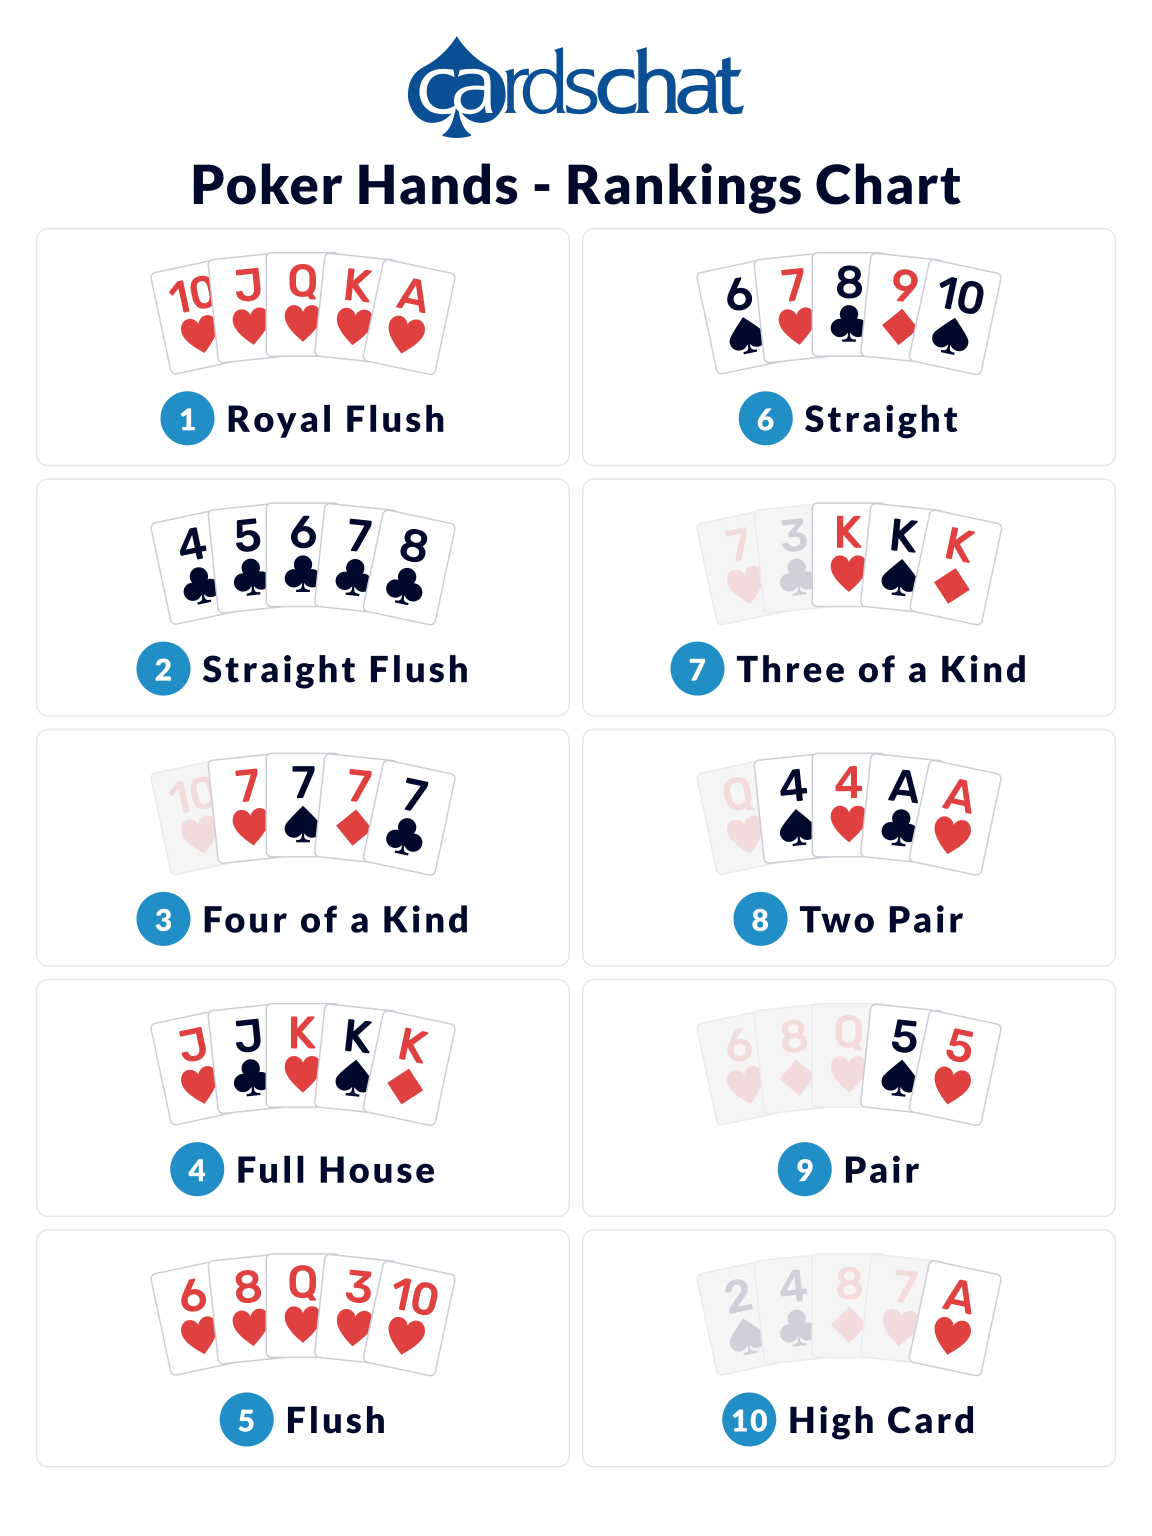 Poker Hand Rankings Poker Hands Chart ⇛ All You Need to Know